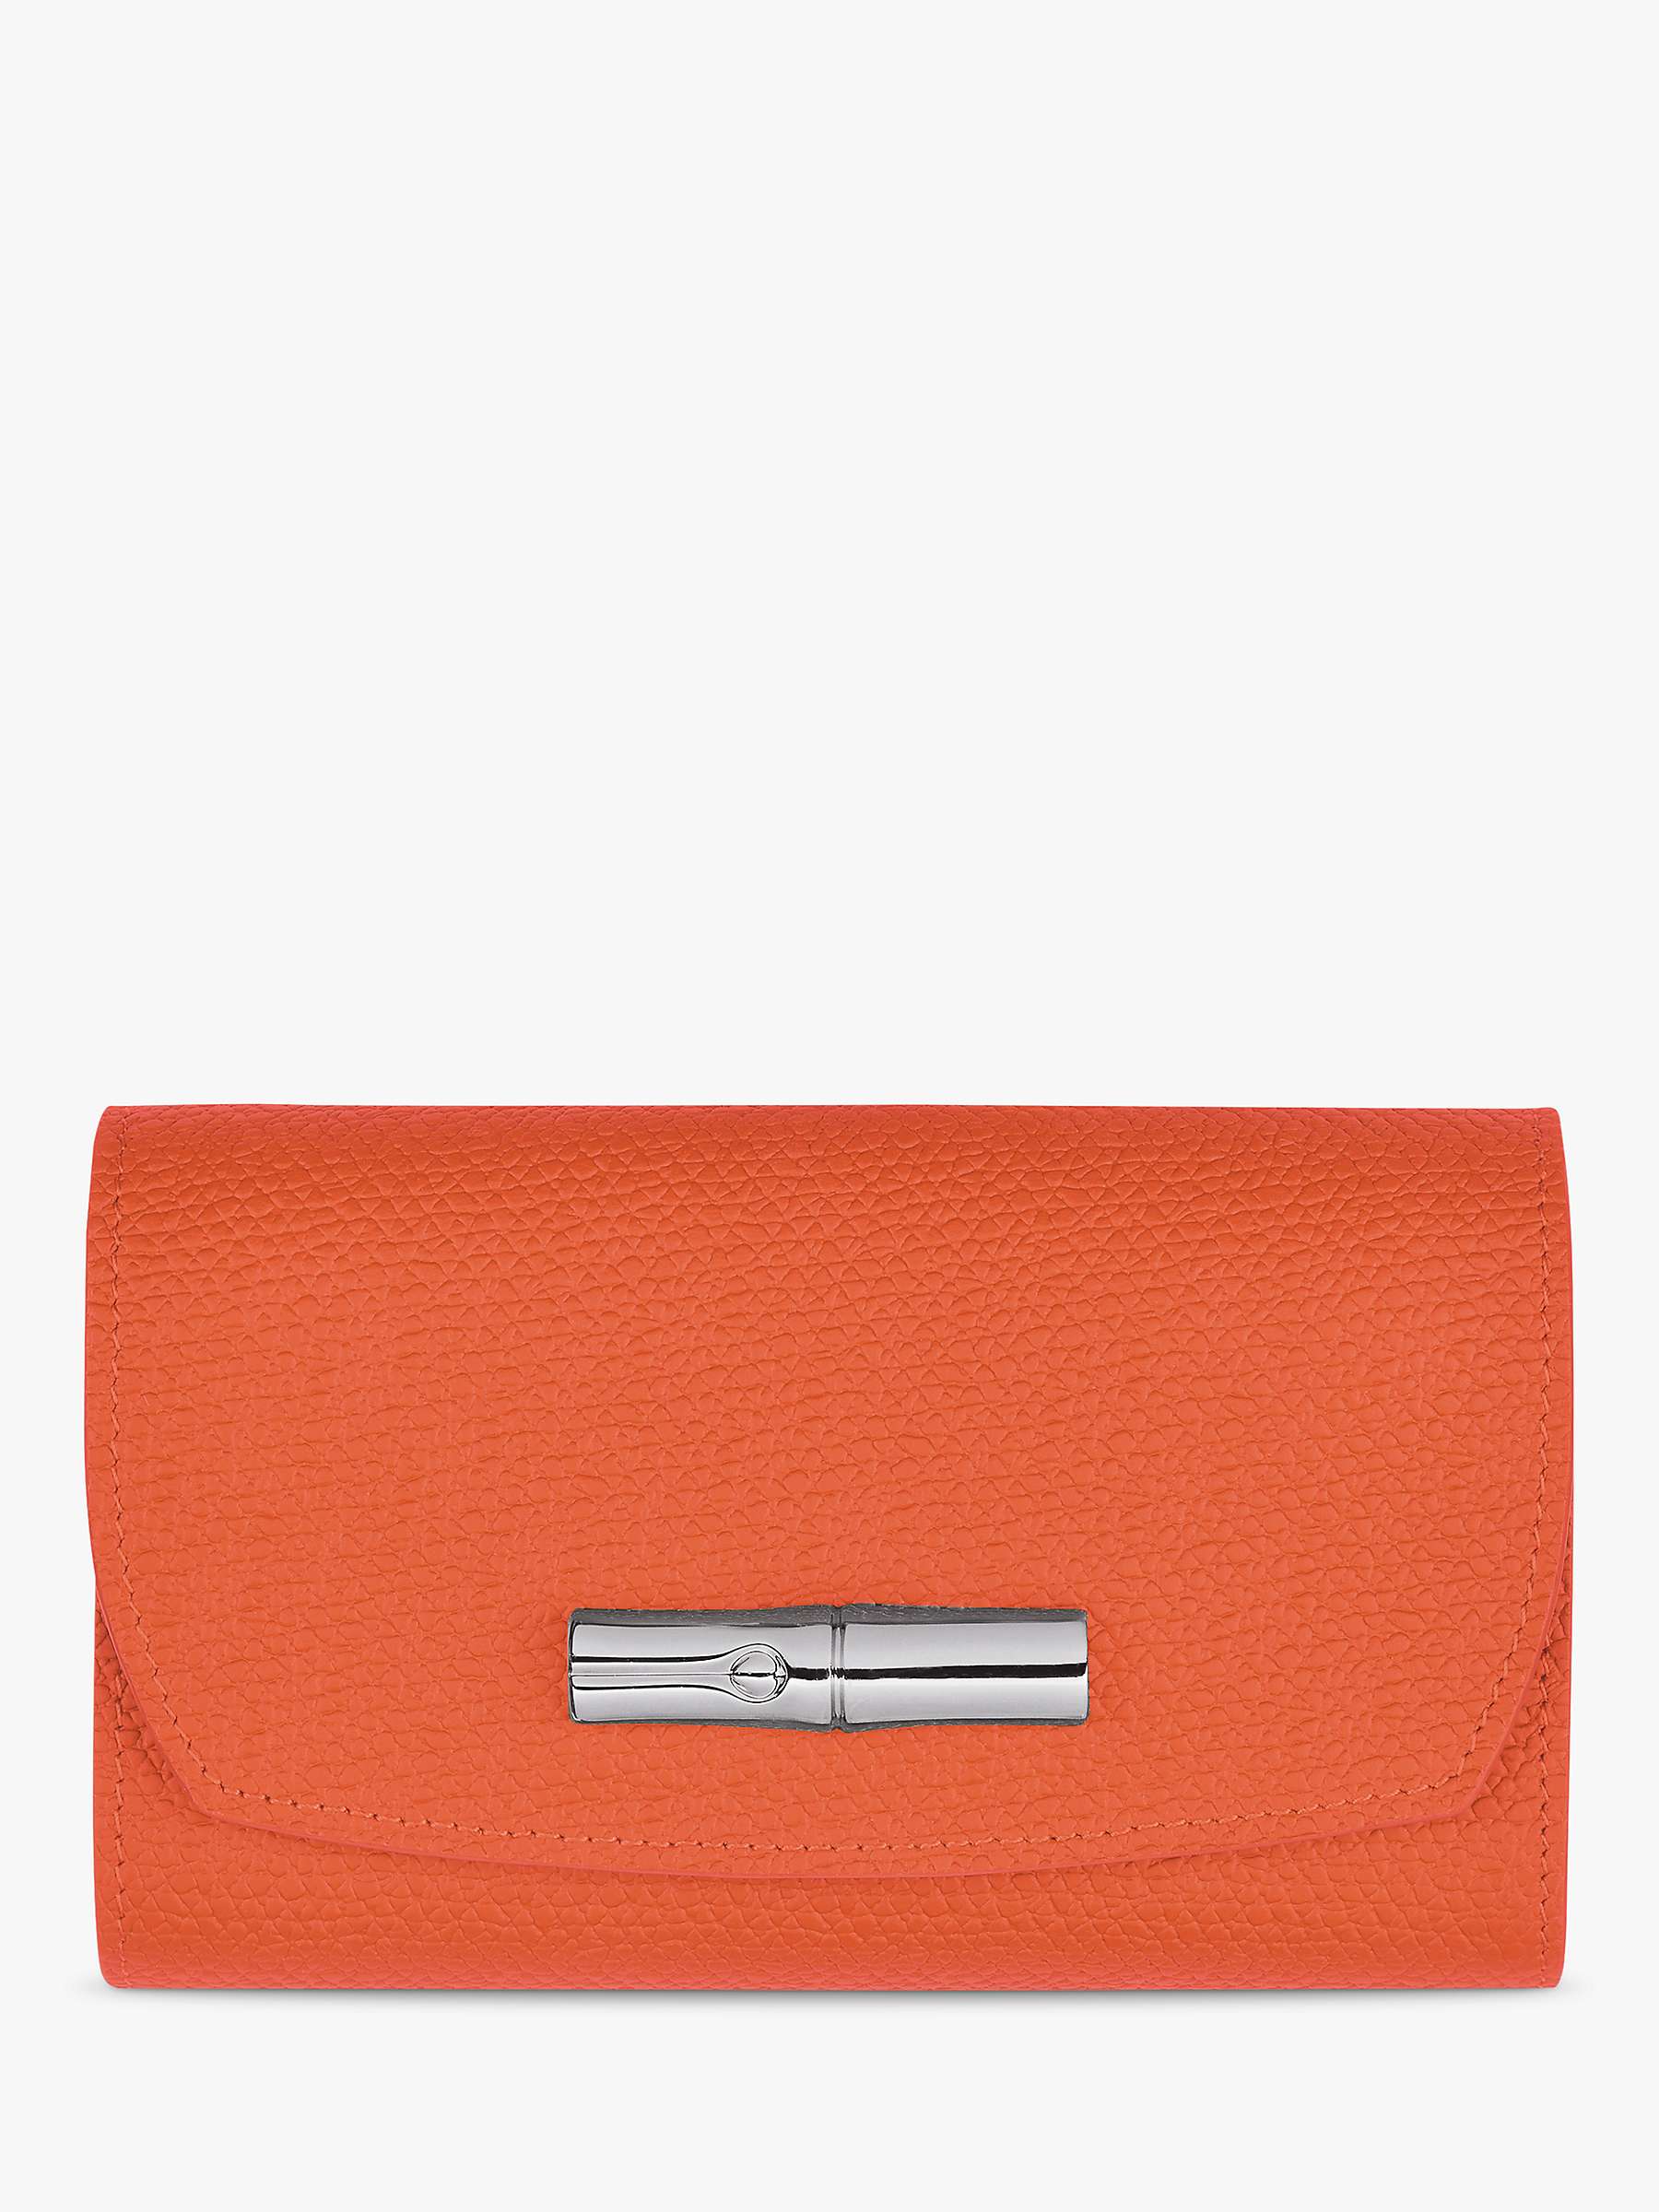 Buy Longchamp Roseau Leather Compact Wallet Online at johnlewis.com